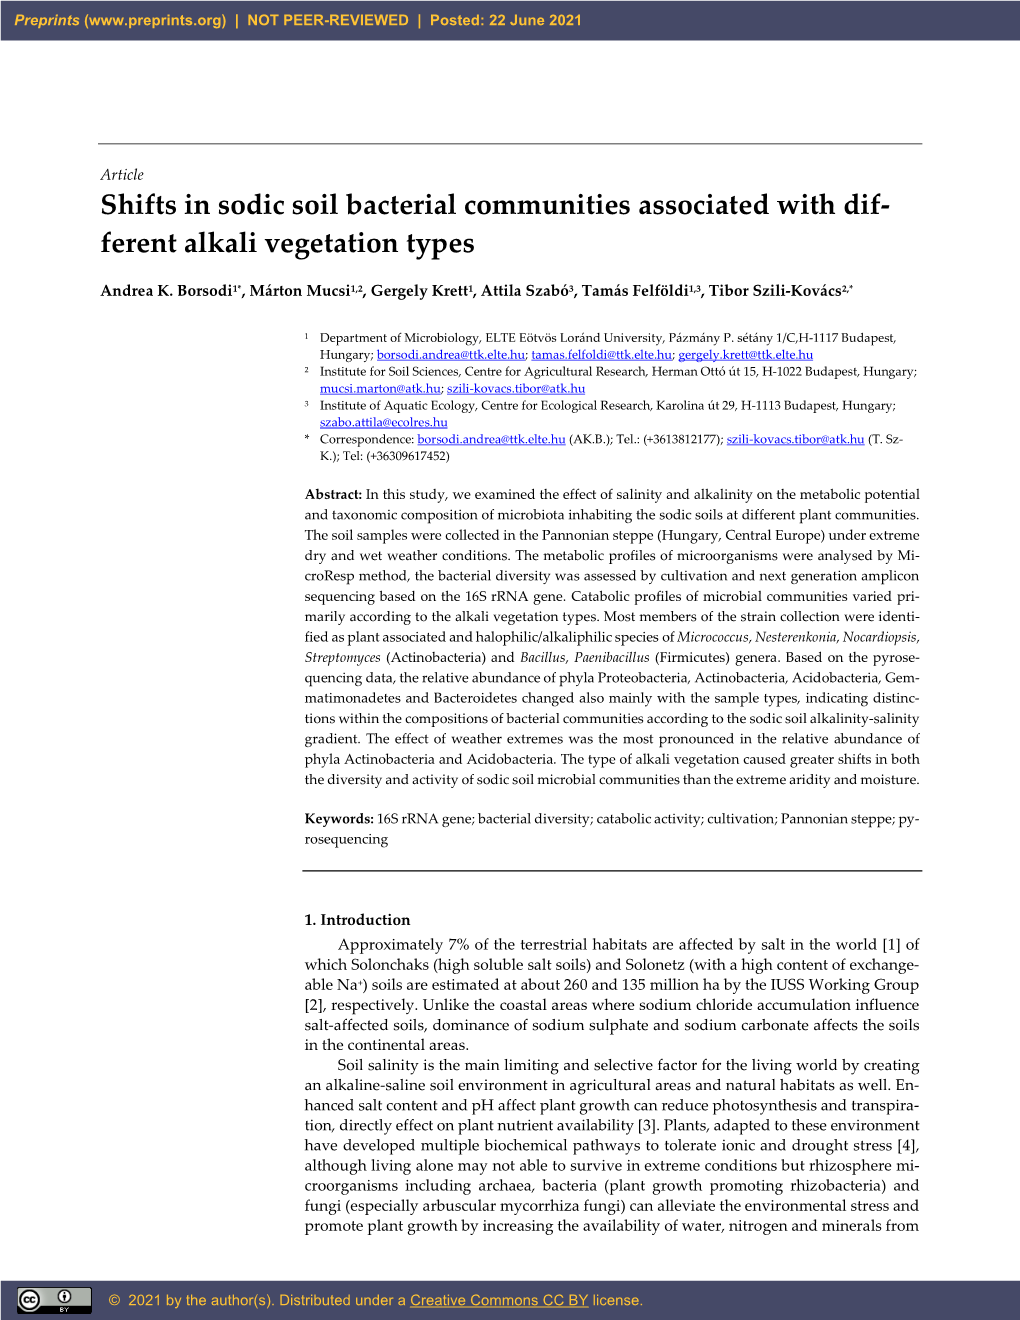 Shifts in Sodic Soil Bacterial Communities Associated with Dif- Ferent Alkali Vegetation Types